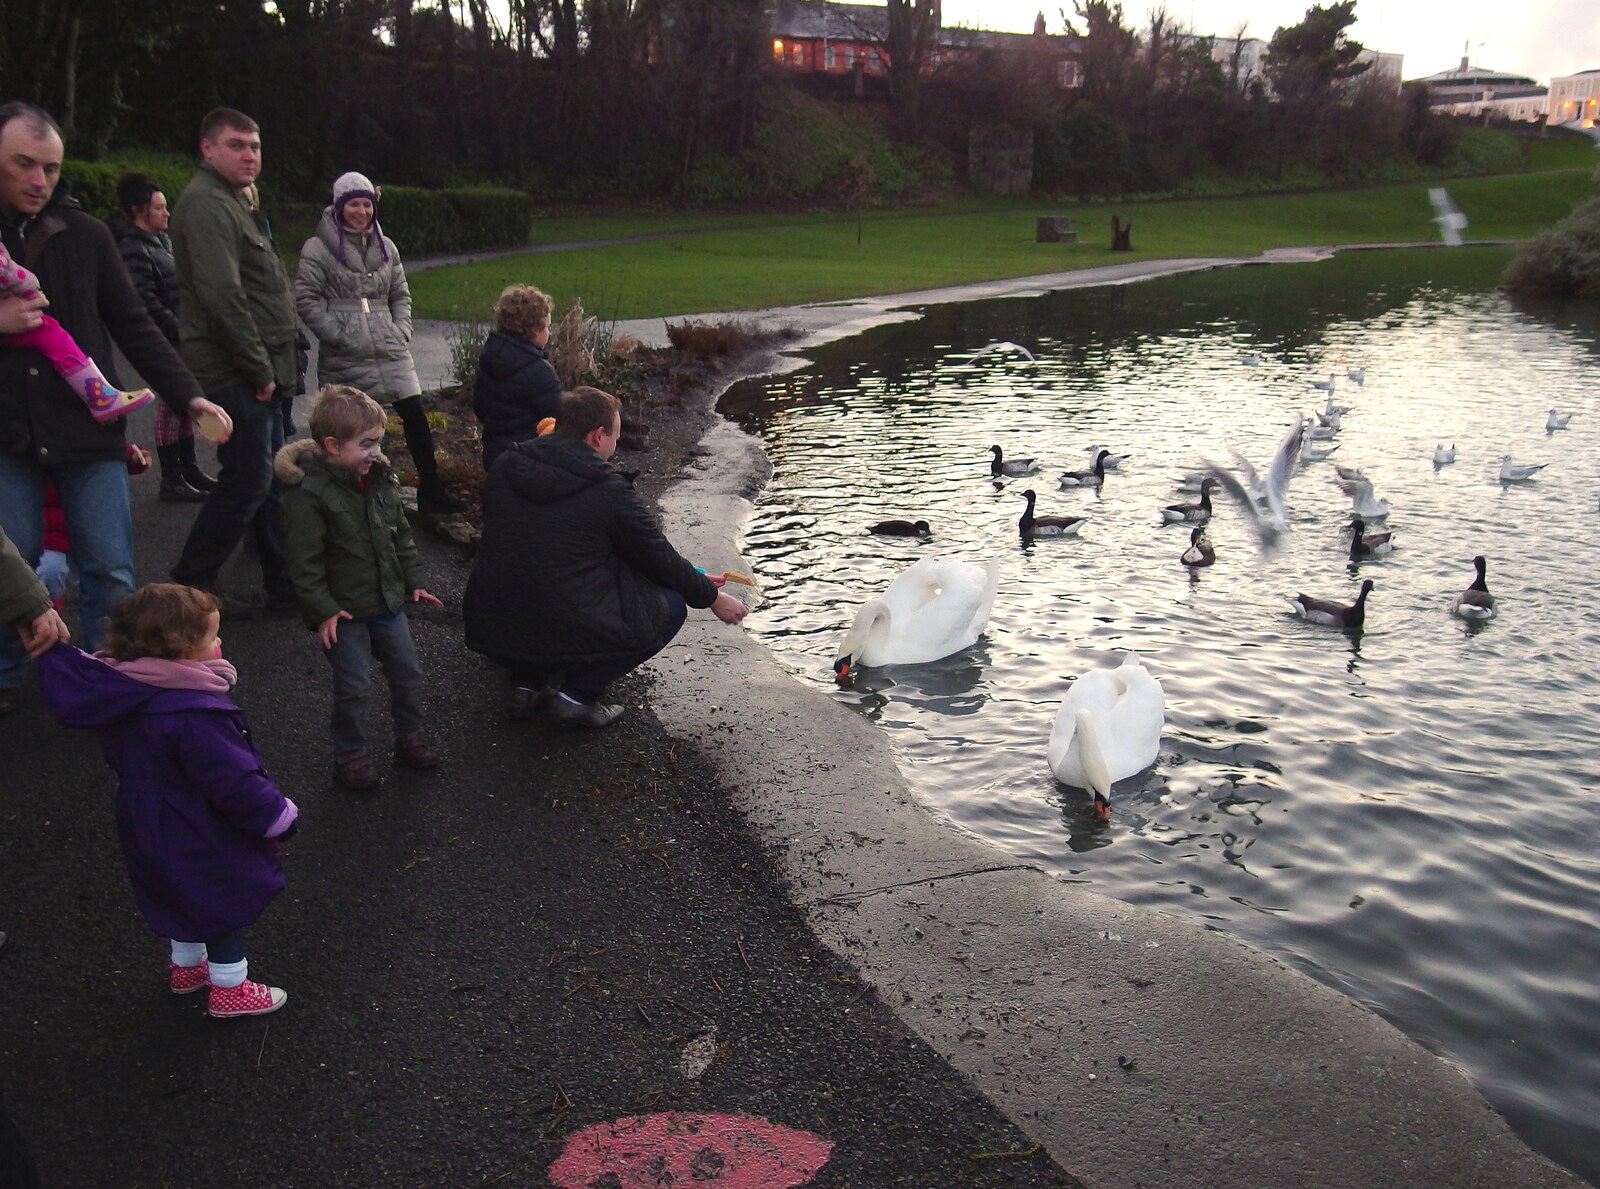 Feeding the swans a ducks from Dun Laoghaire and an Electrical Disaster, Monkstown, County Dublin, Ireland - 4th January 2014